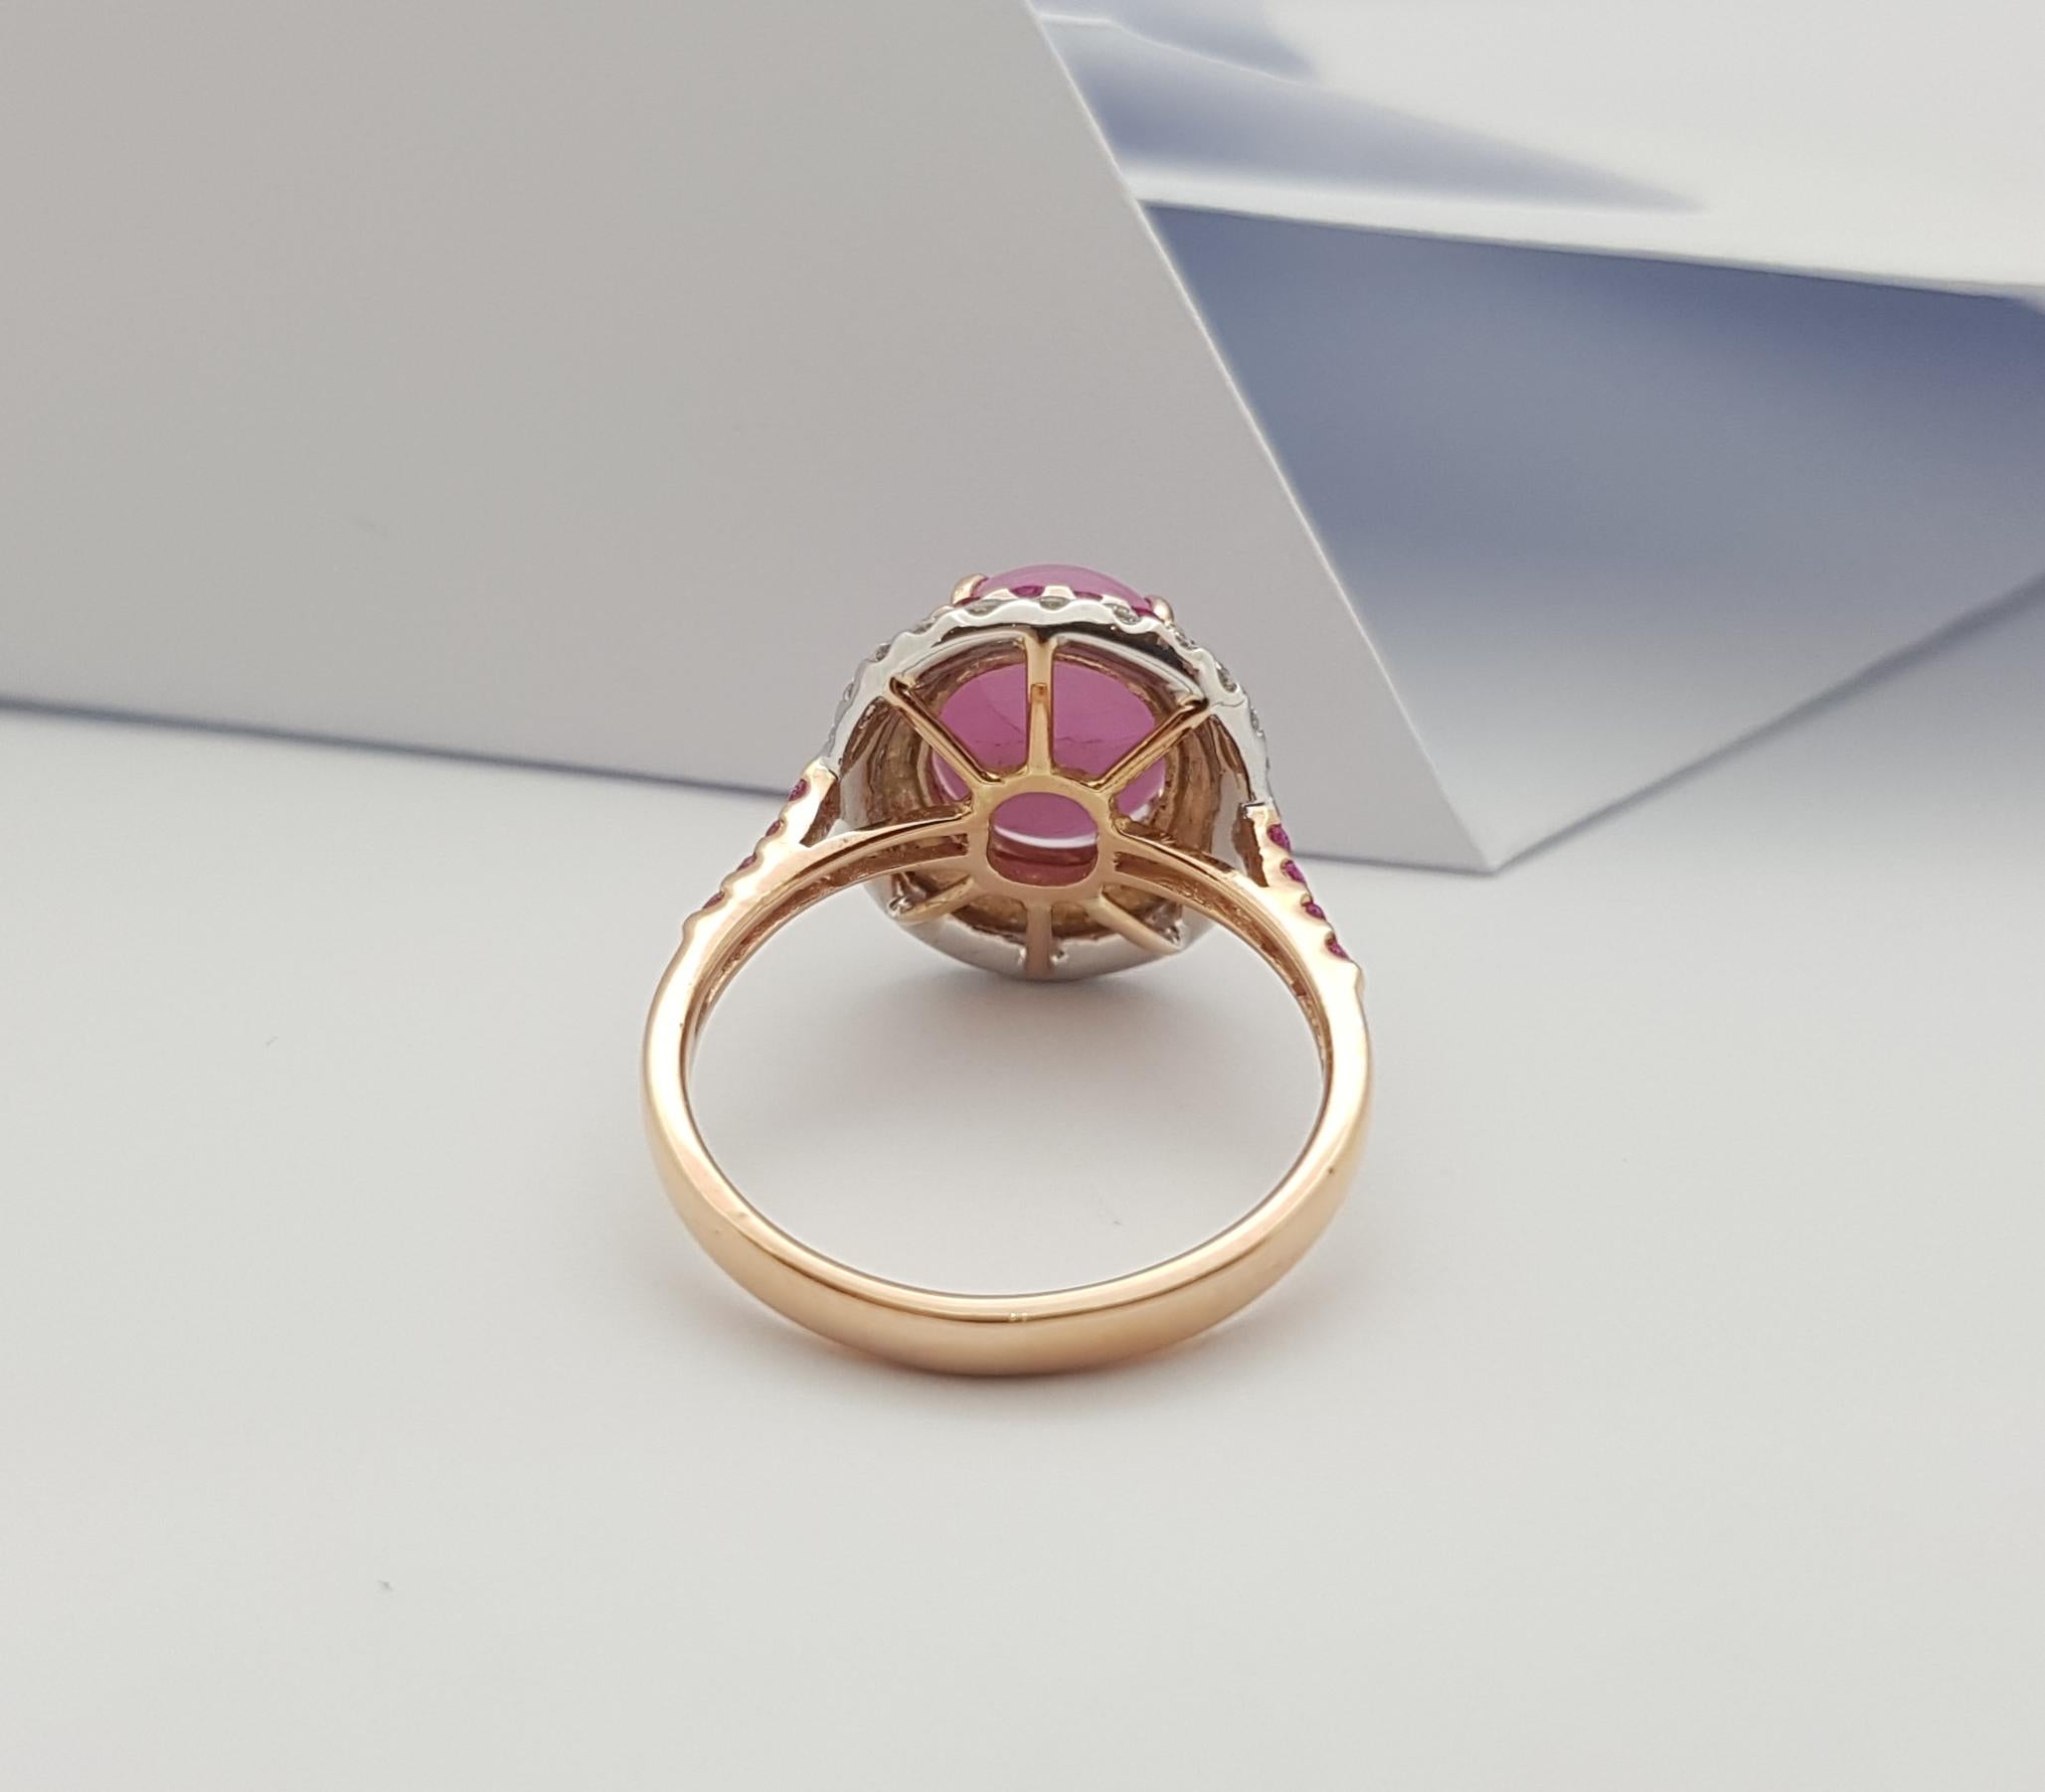 Certified Unheated Star Pink Sapphire, Diamond Ring in 18K Rose Gold For Sale 3